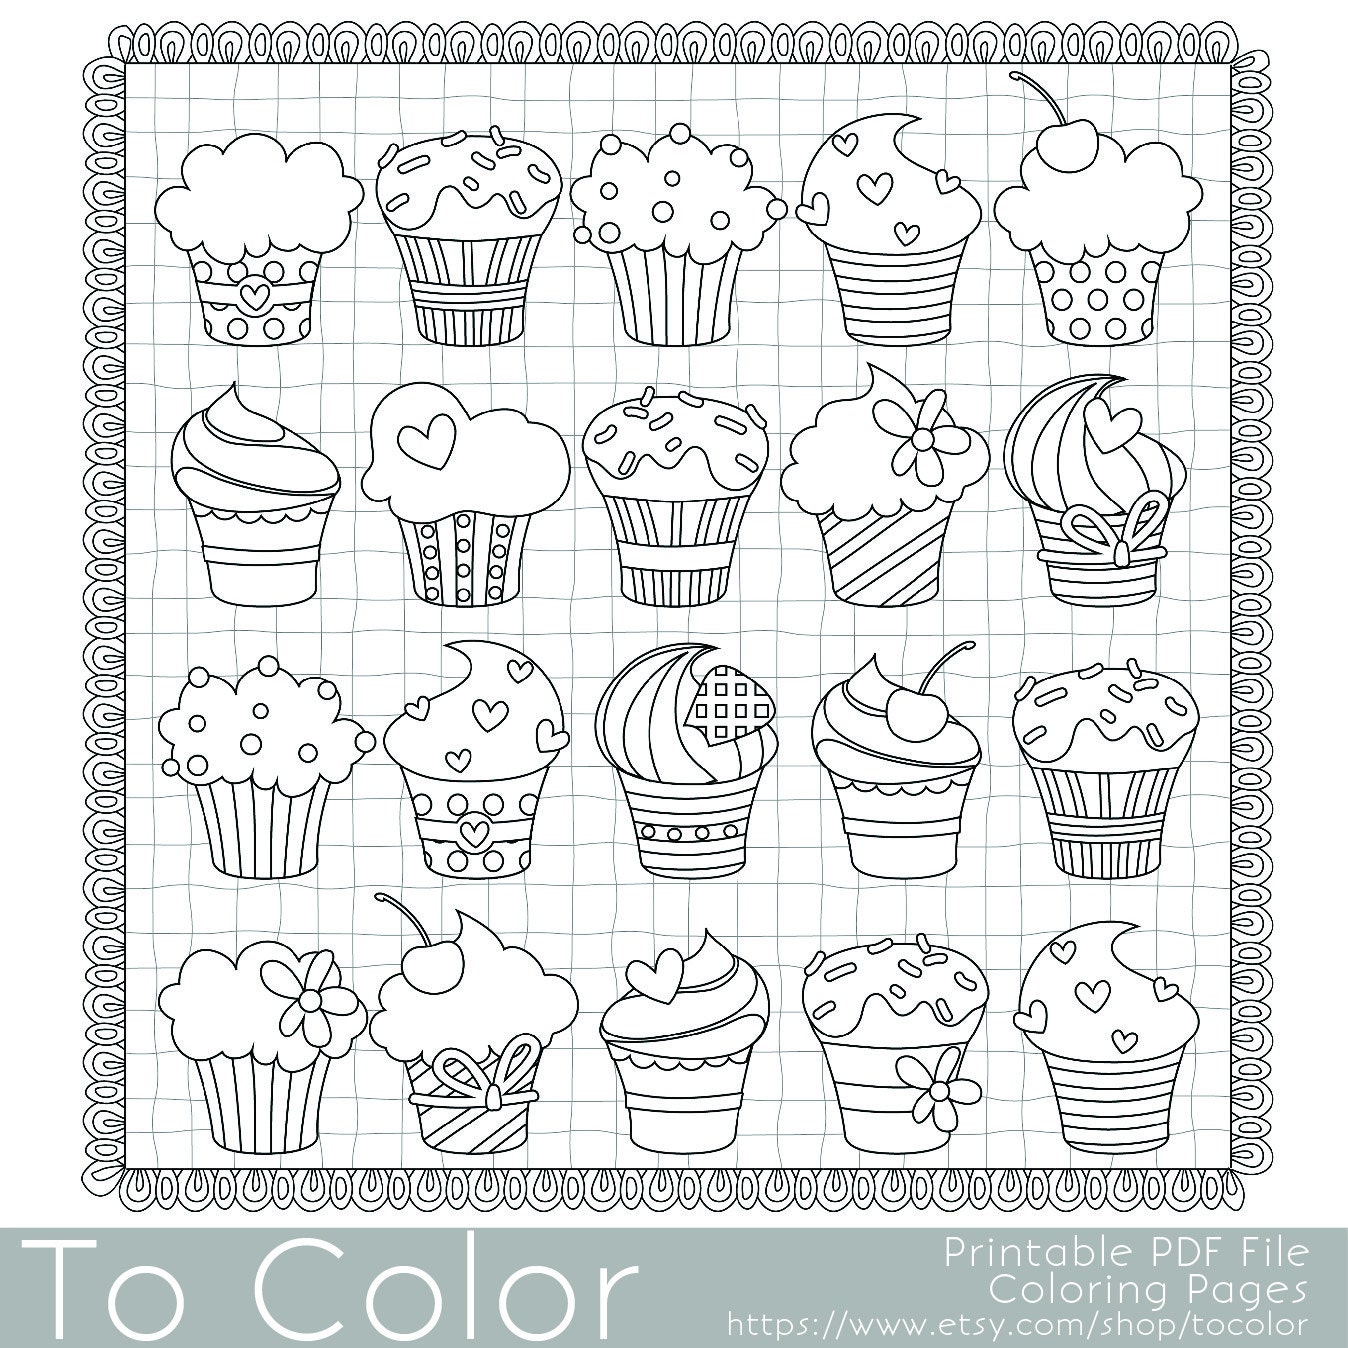 Cupcakes Coloring Page for Adults PDF / JPG Instant